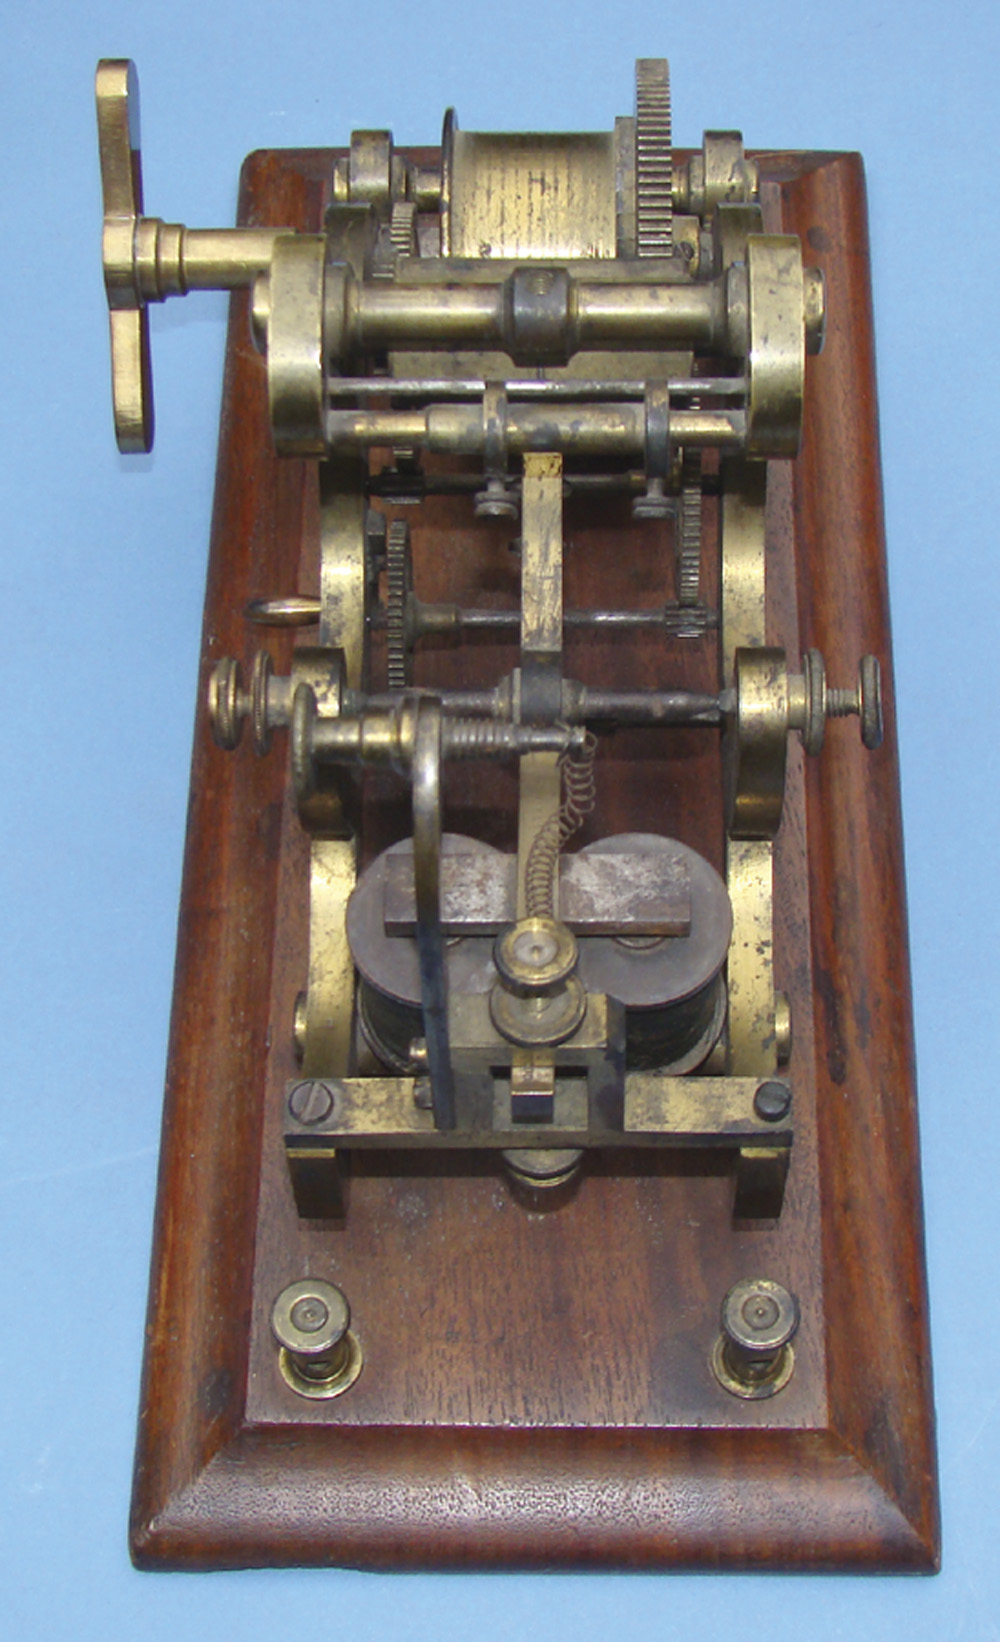 EARLY RECORDING TELEGRAPH REGISTER — THE SAMUEL MORSE / ALFRED VAIL DESIGN